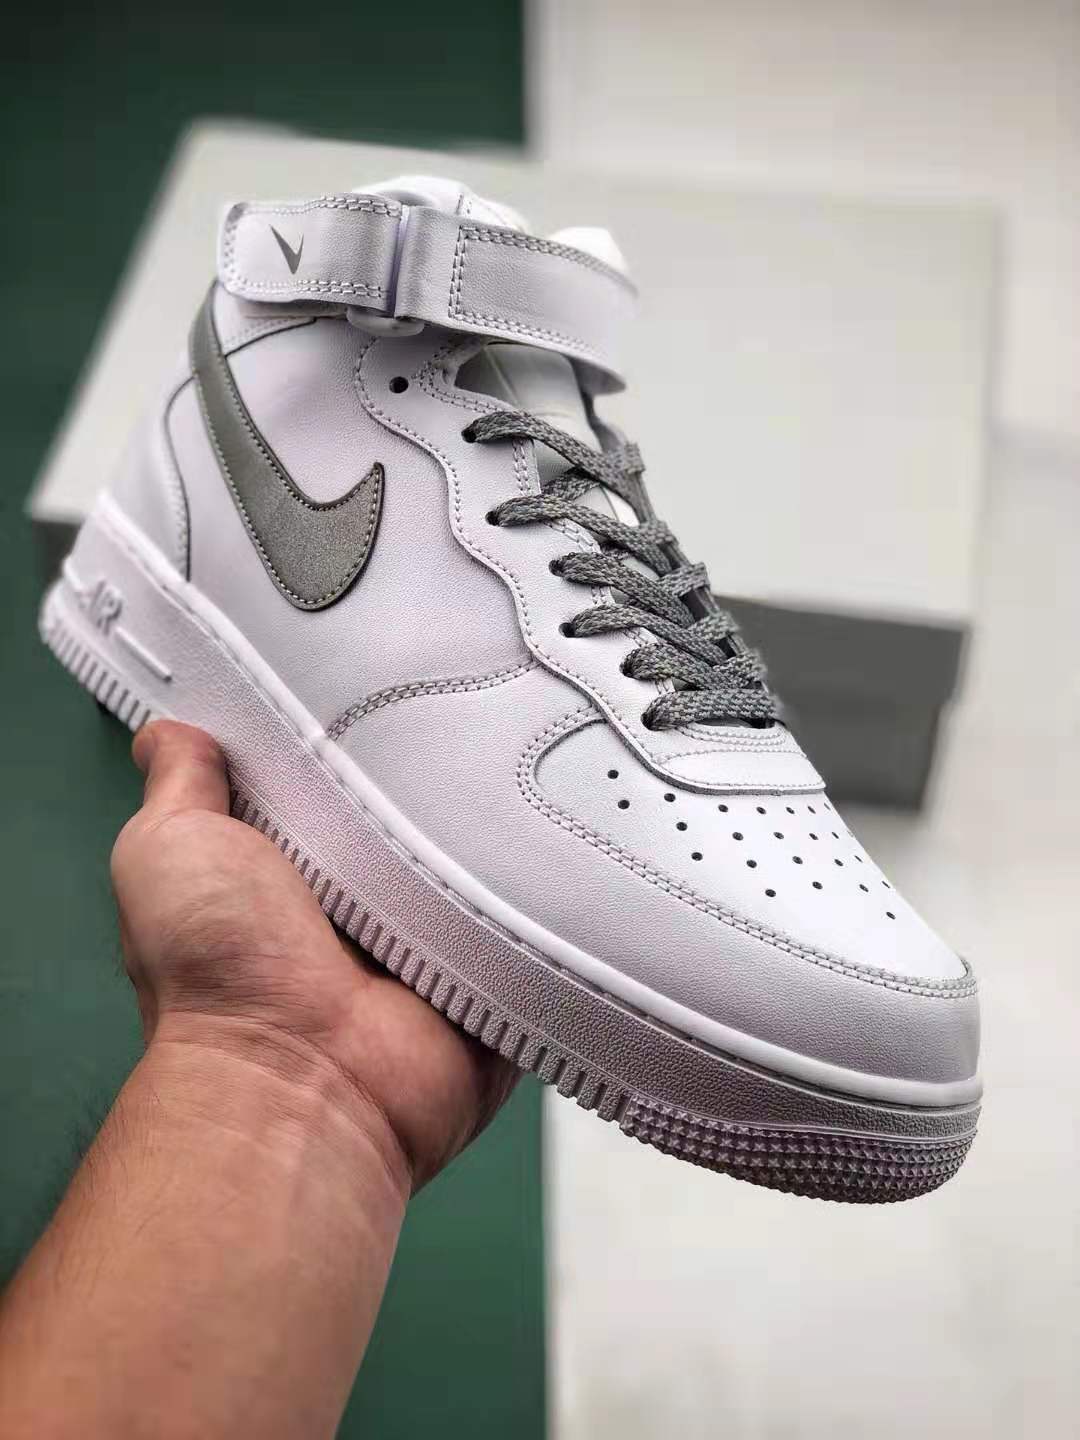 Nike Air Force 1'07 Mid White Static 366731-606 - Stylish and Classic Sneakers for Any Outfit